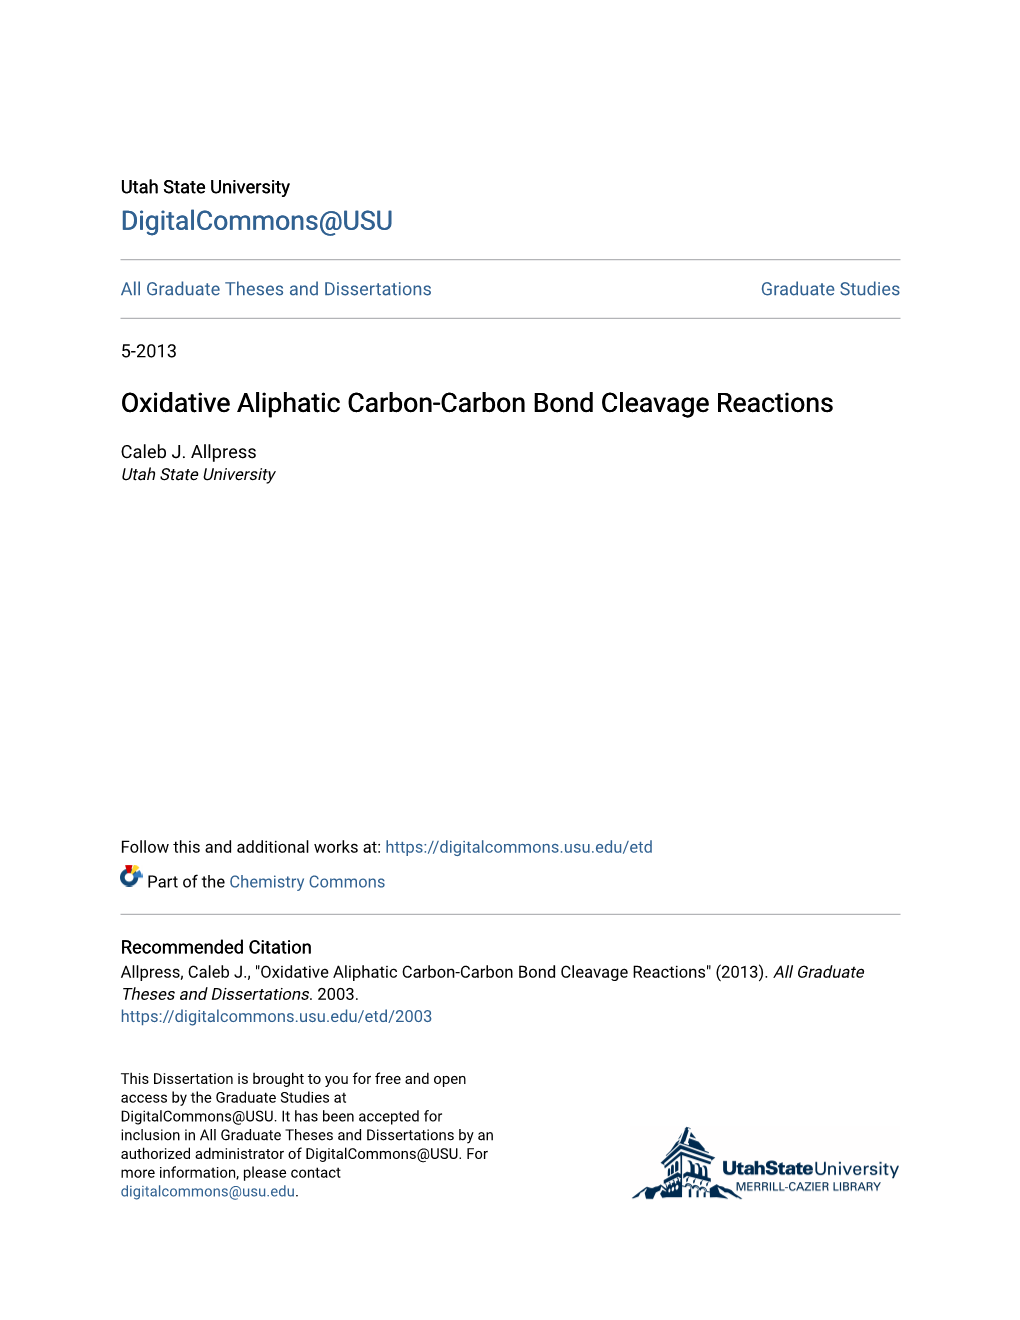 Oxidative Aliphatic Carbon-Carbon Bond Cleavage Reactions